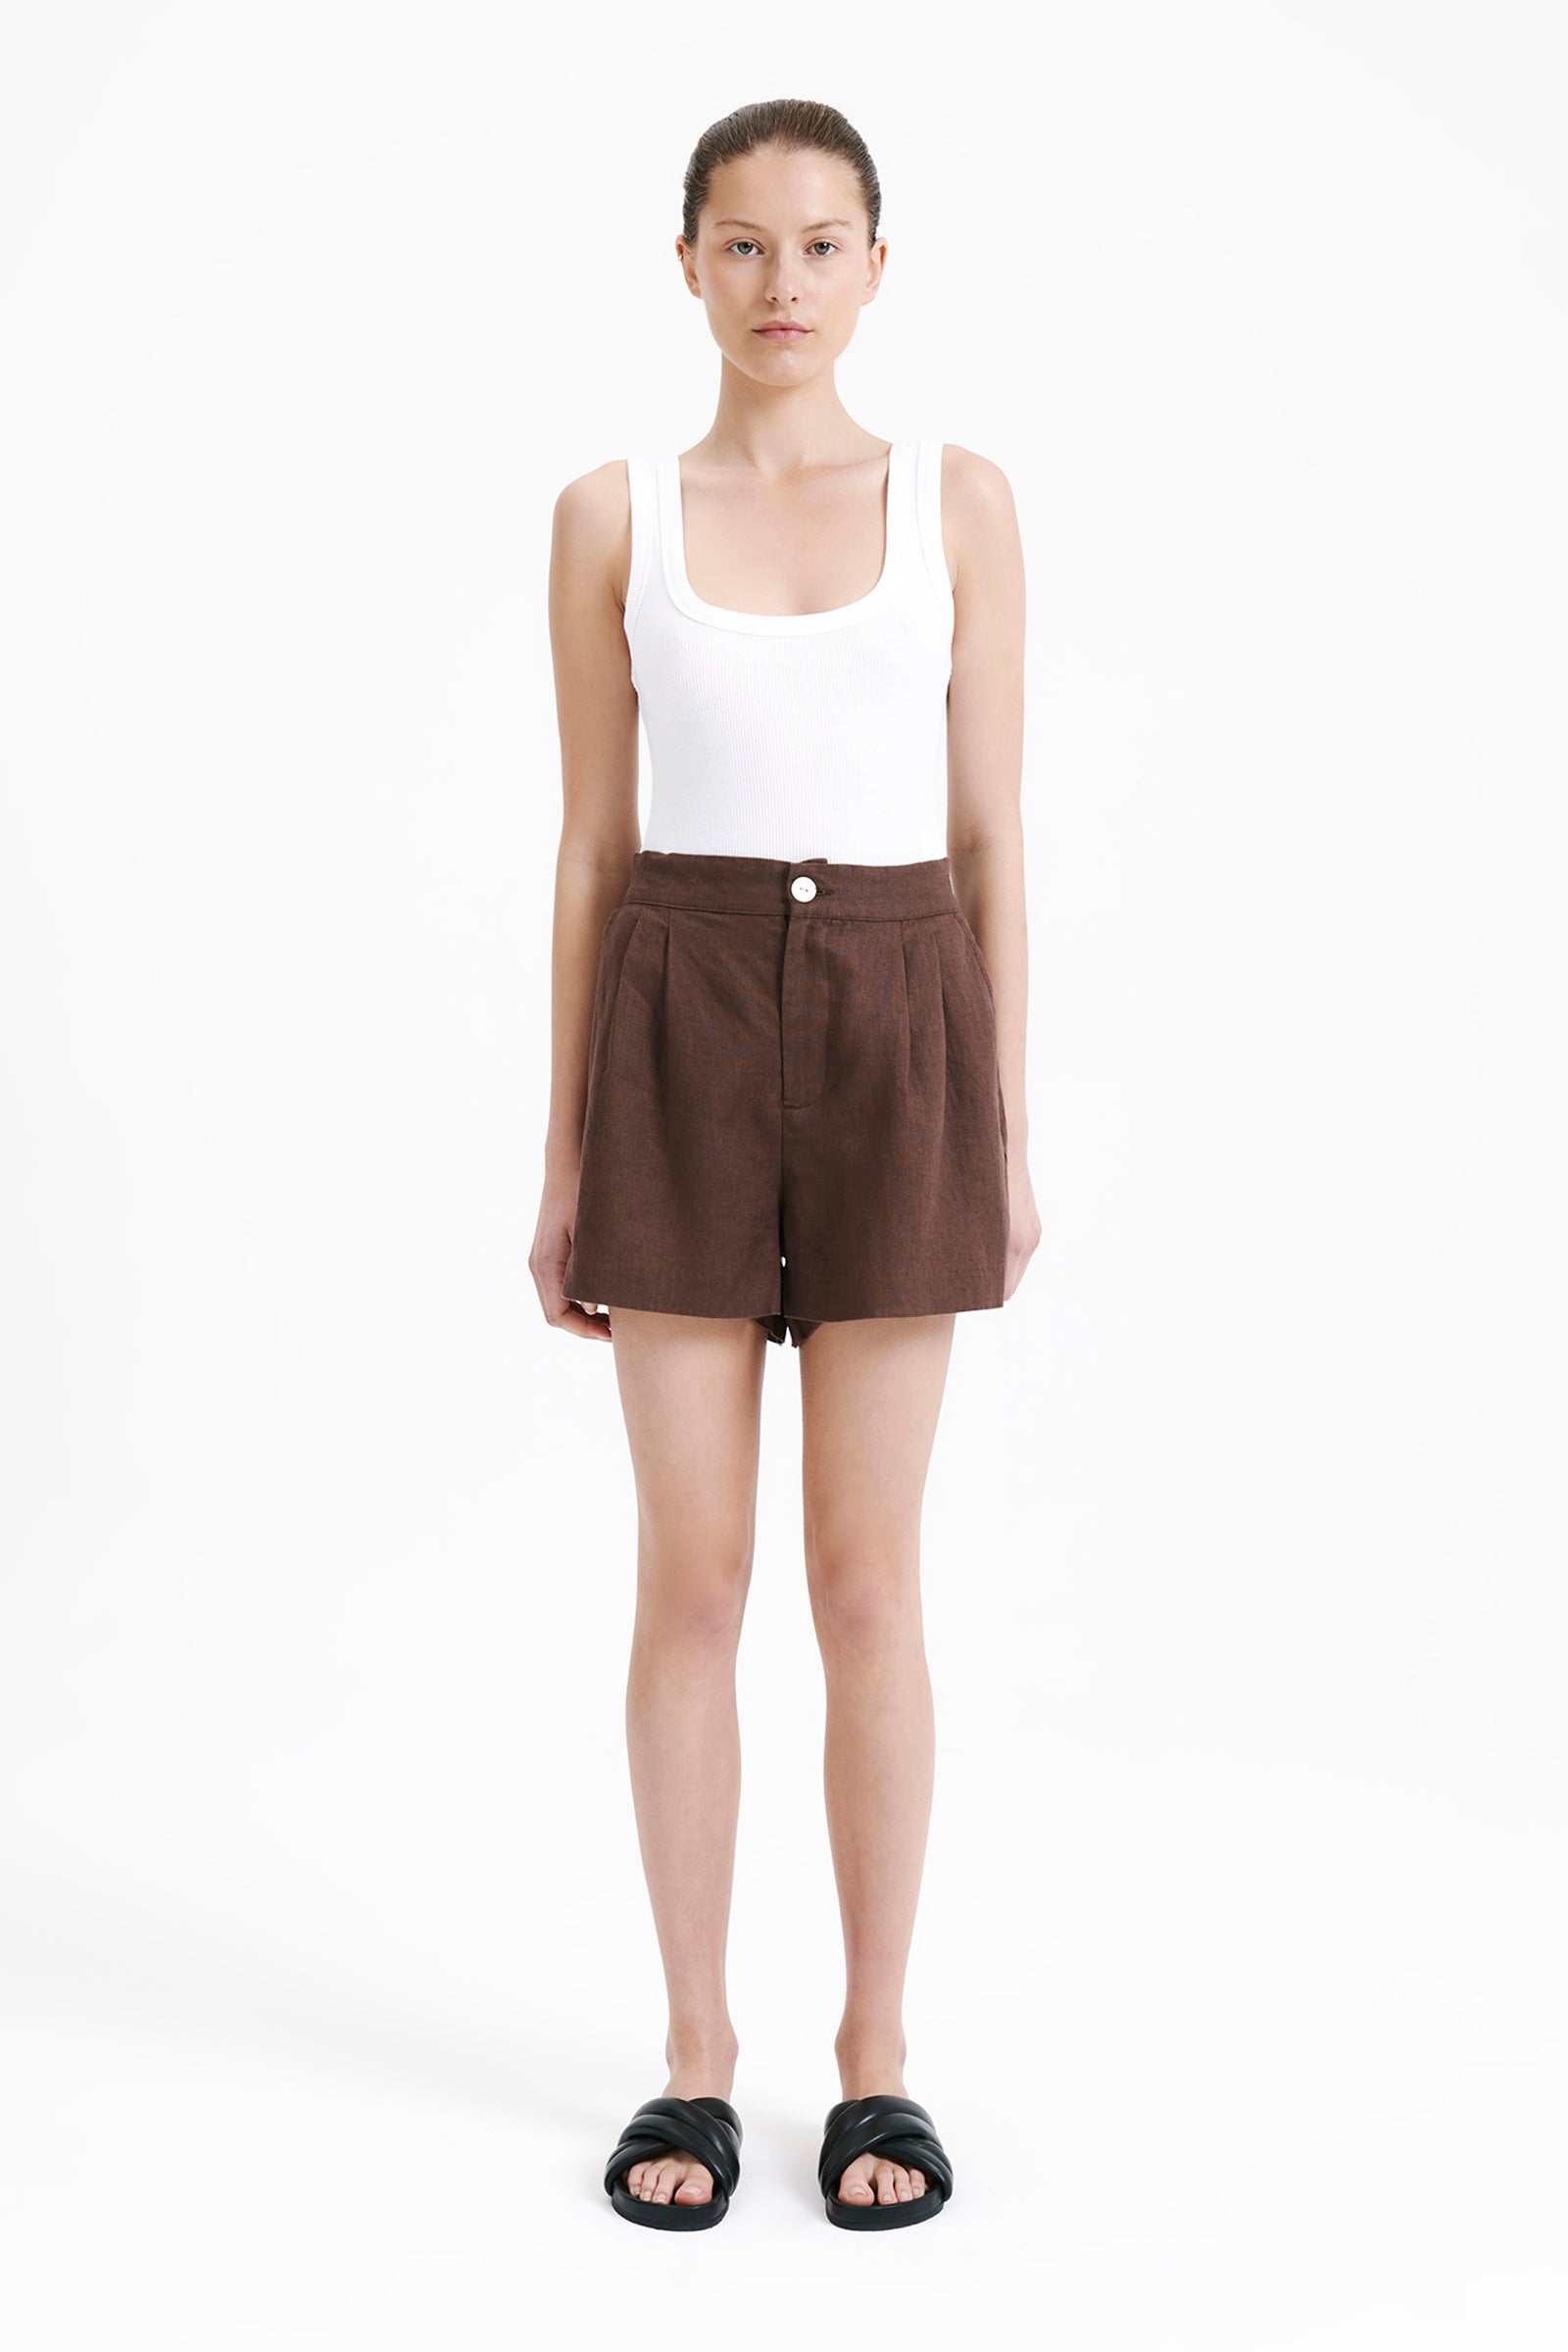 Nude Lucy Rynn Linen Short in a Brown Chocolate Cacao Colour